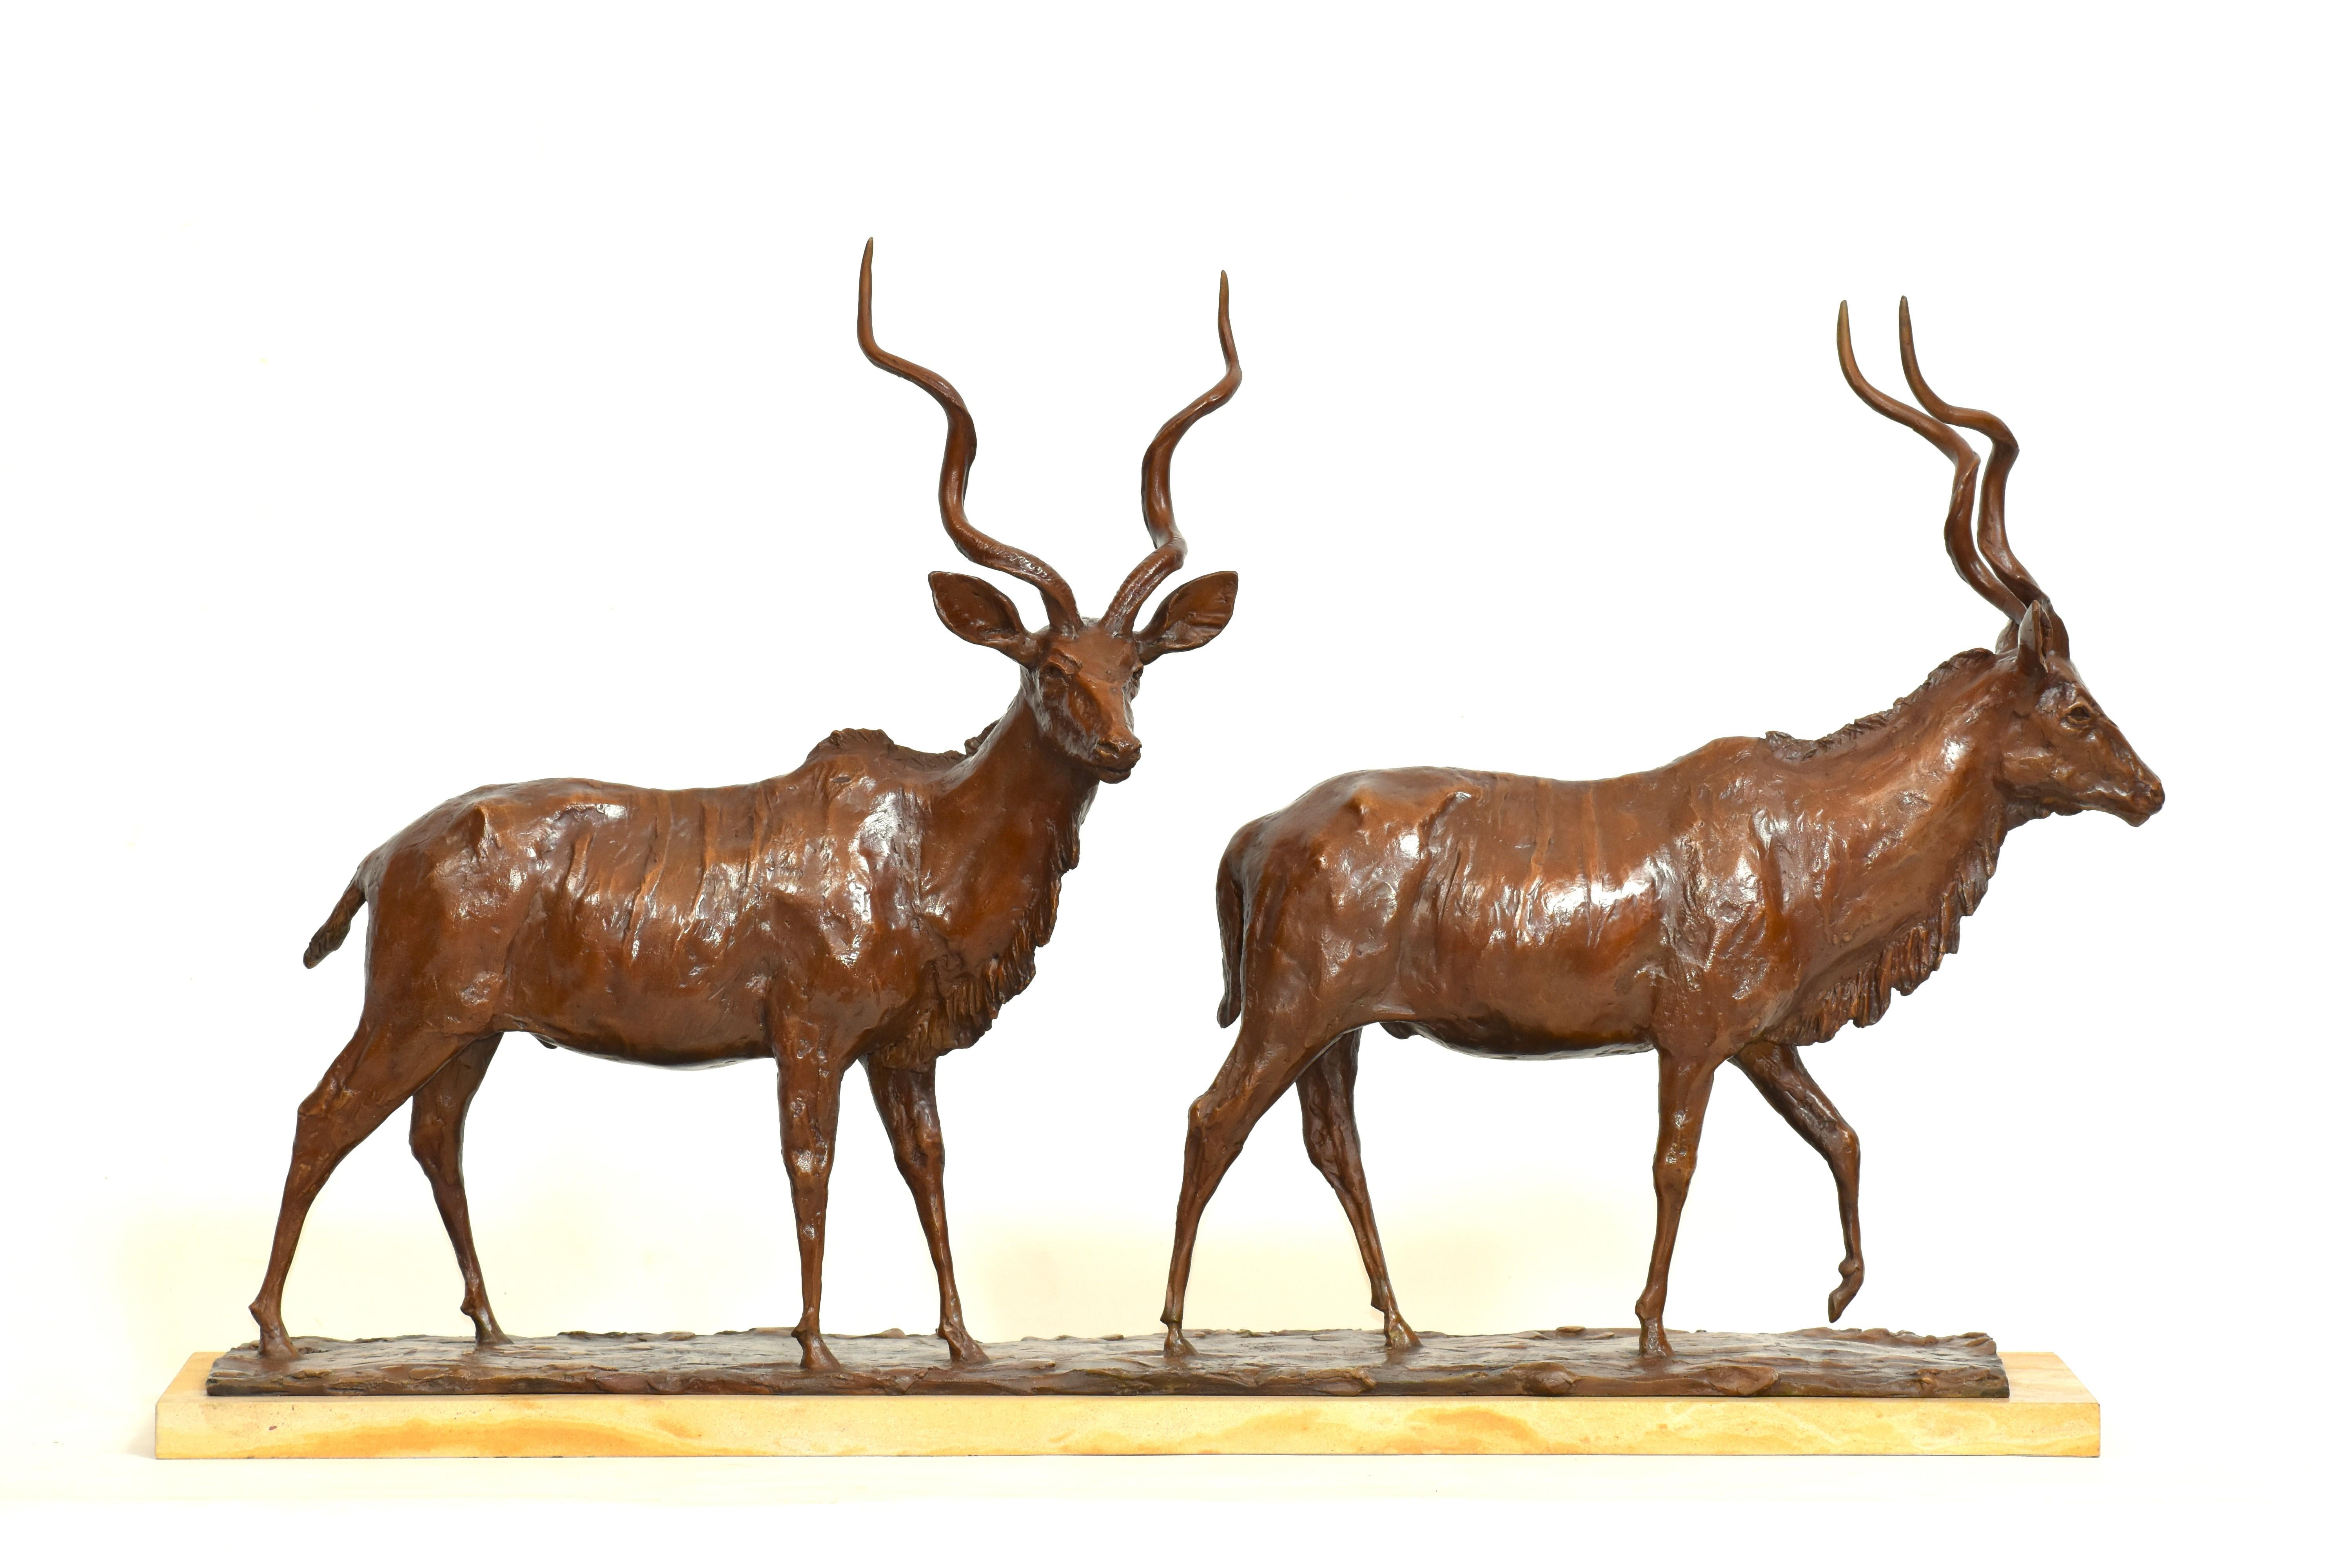 Going to the River - A Journey in Bronze: two Kudu Bulls in cast bronze on Sandstone base. Limited Edition of 12, L 62 cm x H 38 cm x W 20 cm.

Crafted in meticulous detail, this piece features two kudu bulls in stride, each moment captured with